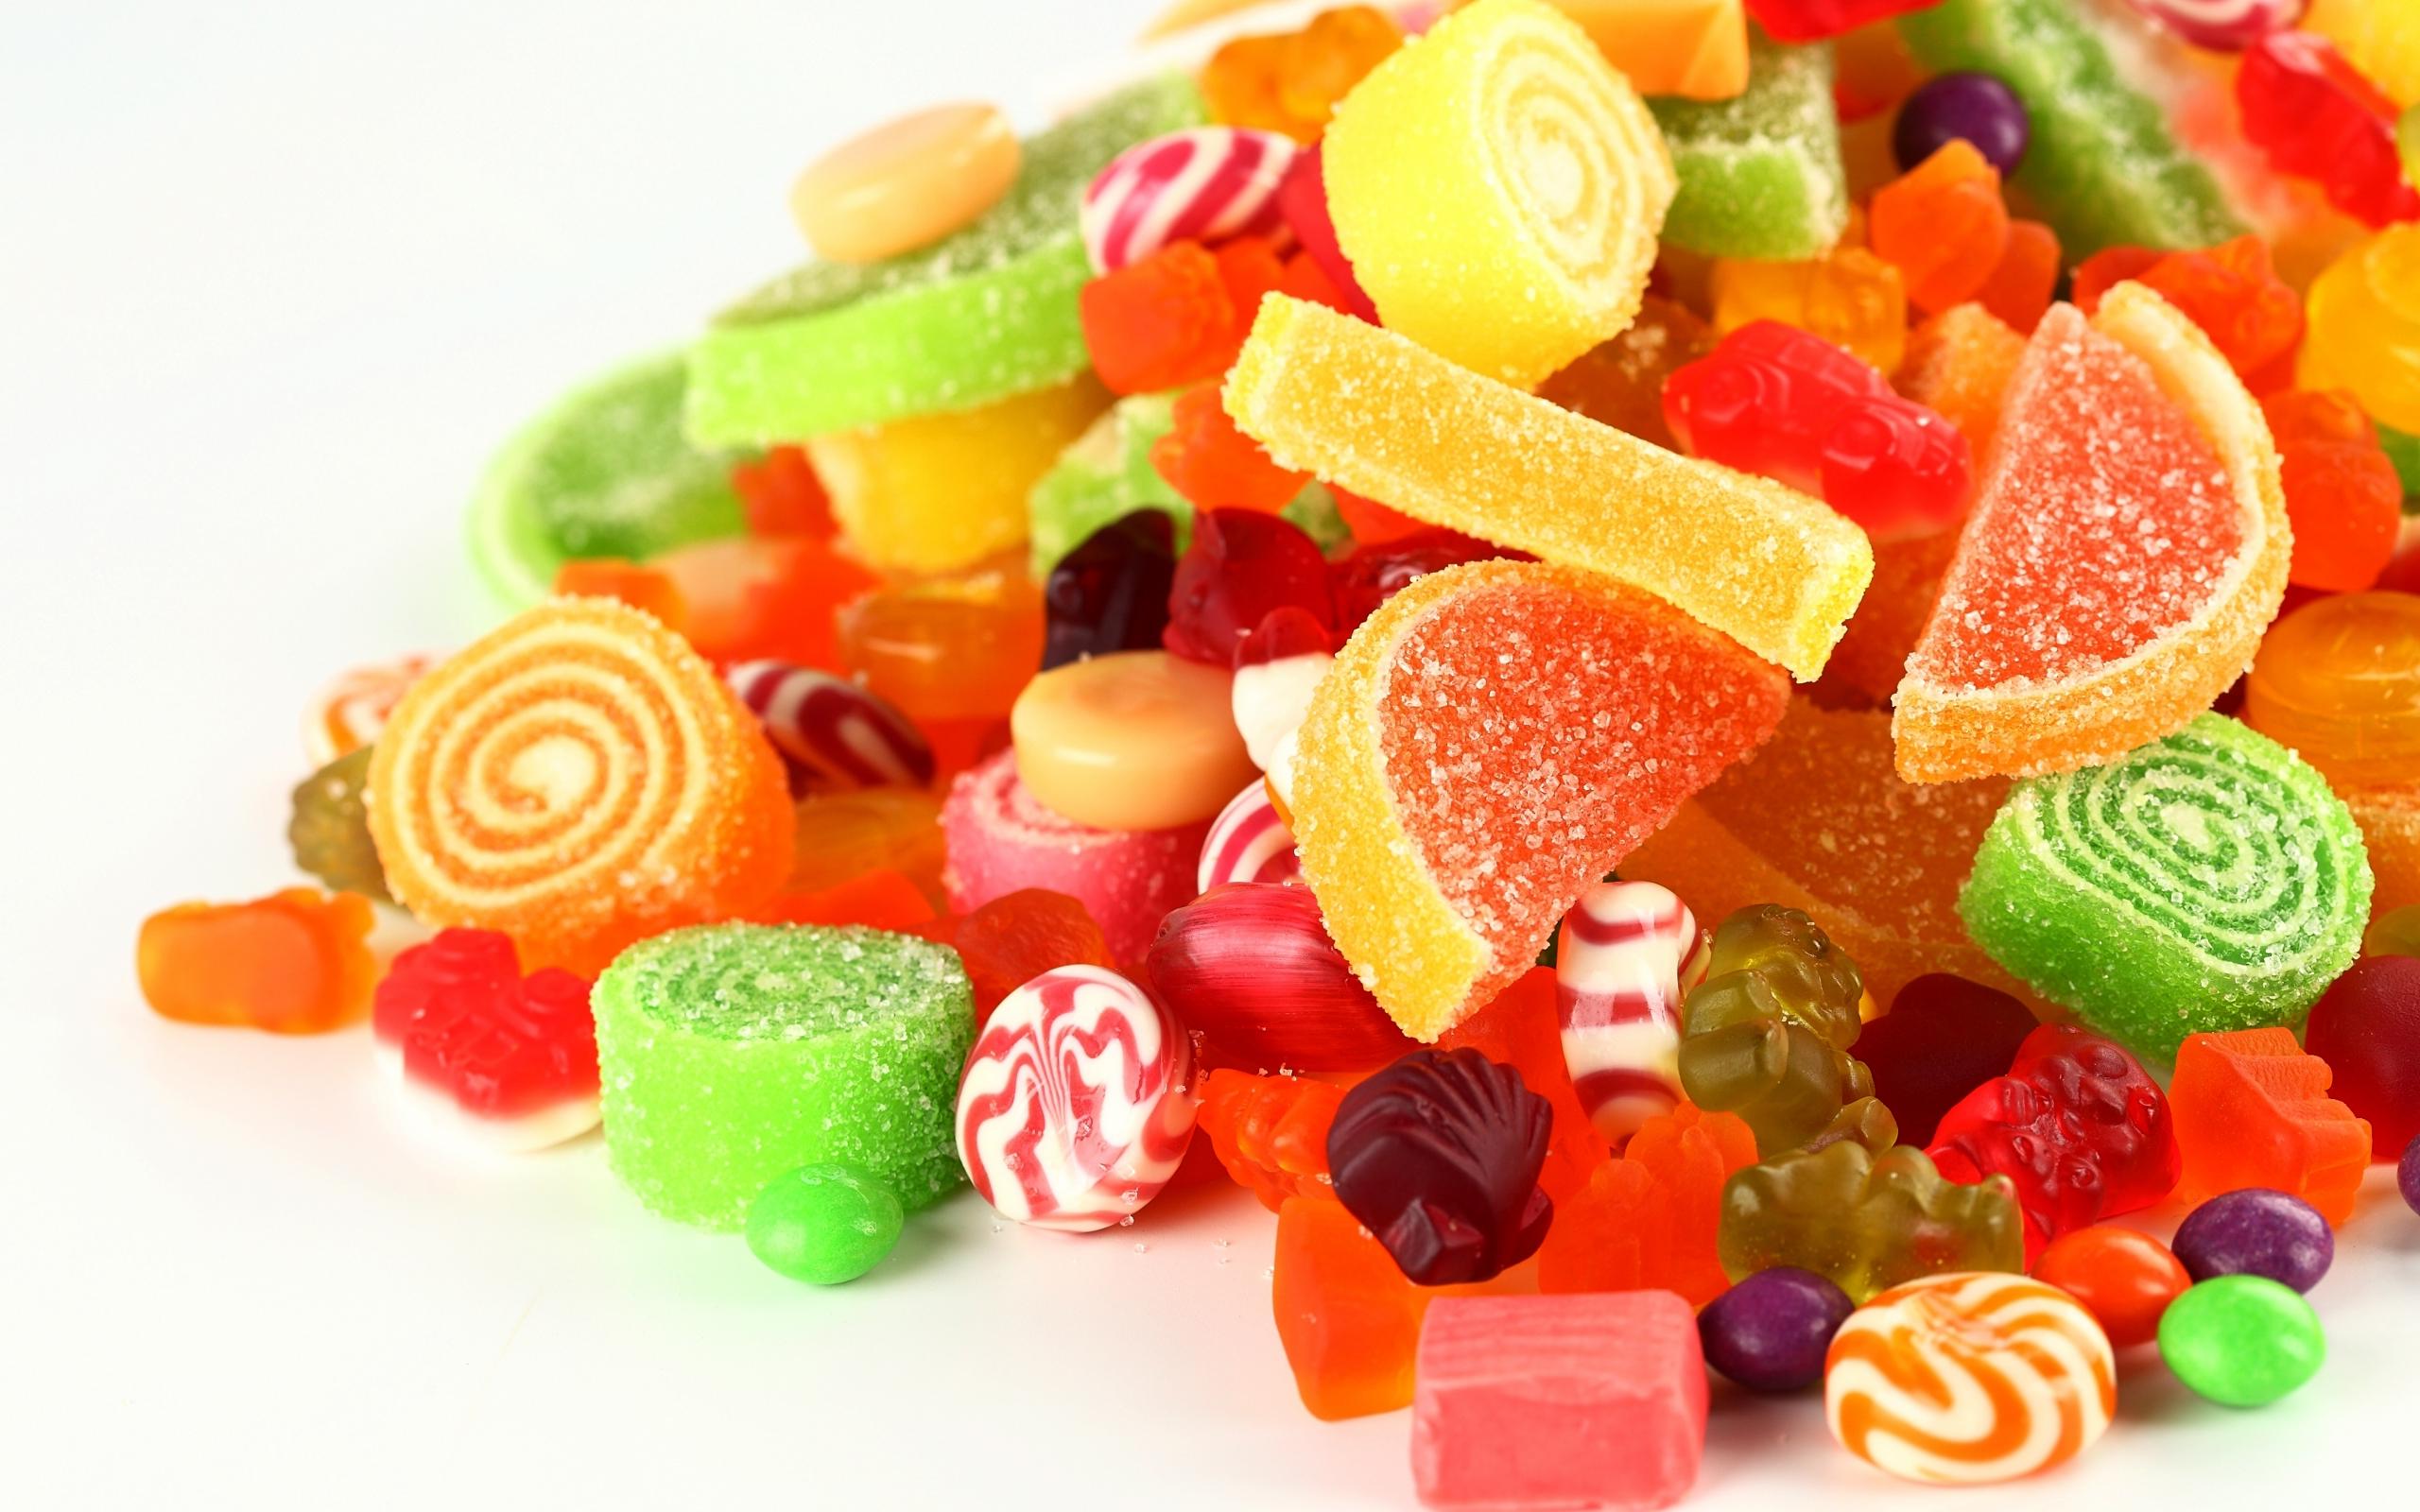 Colorful Candy Wallpaper | 2560x1600 | ID:40358